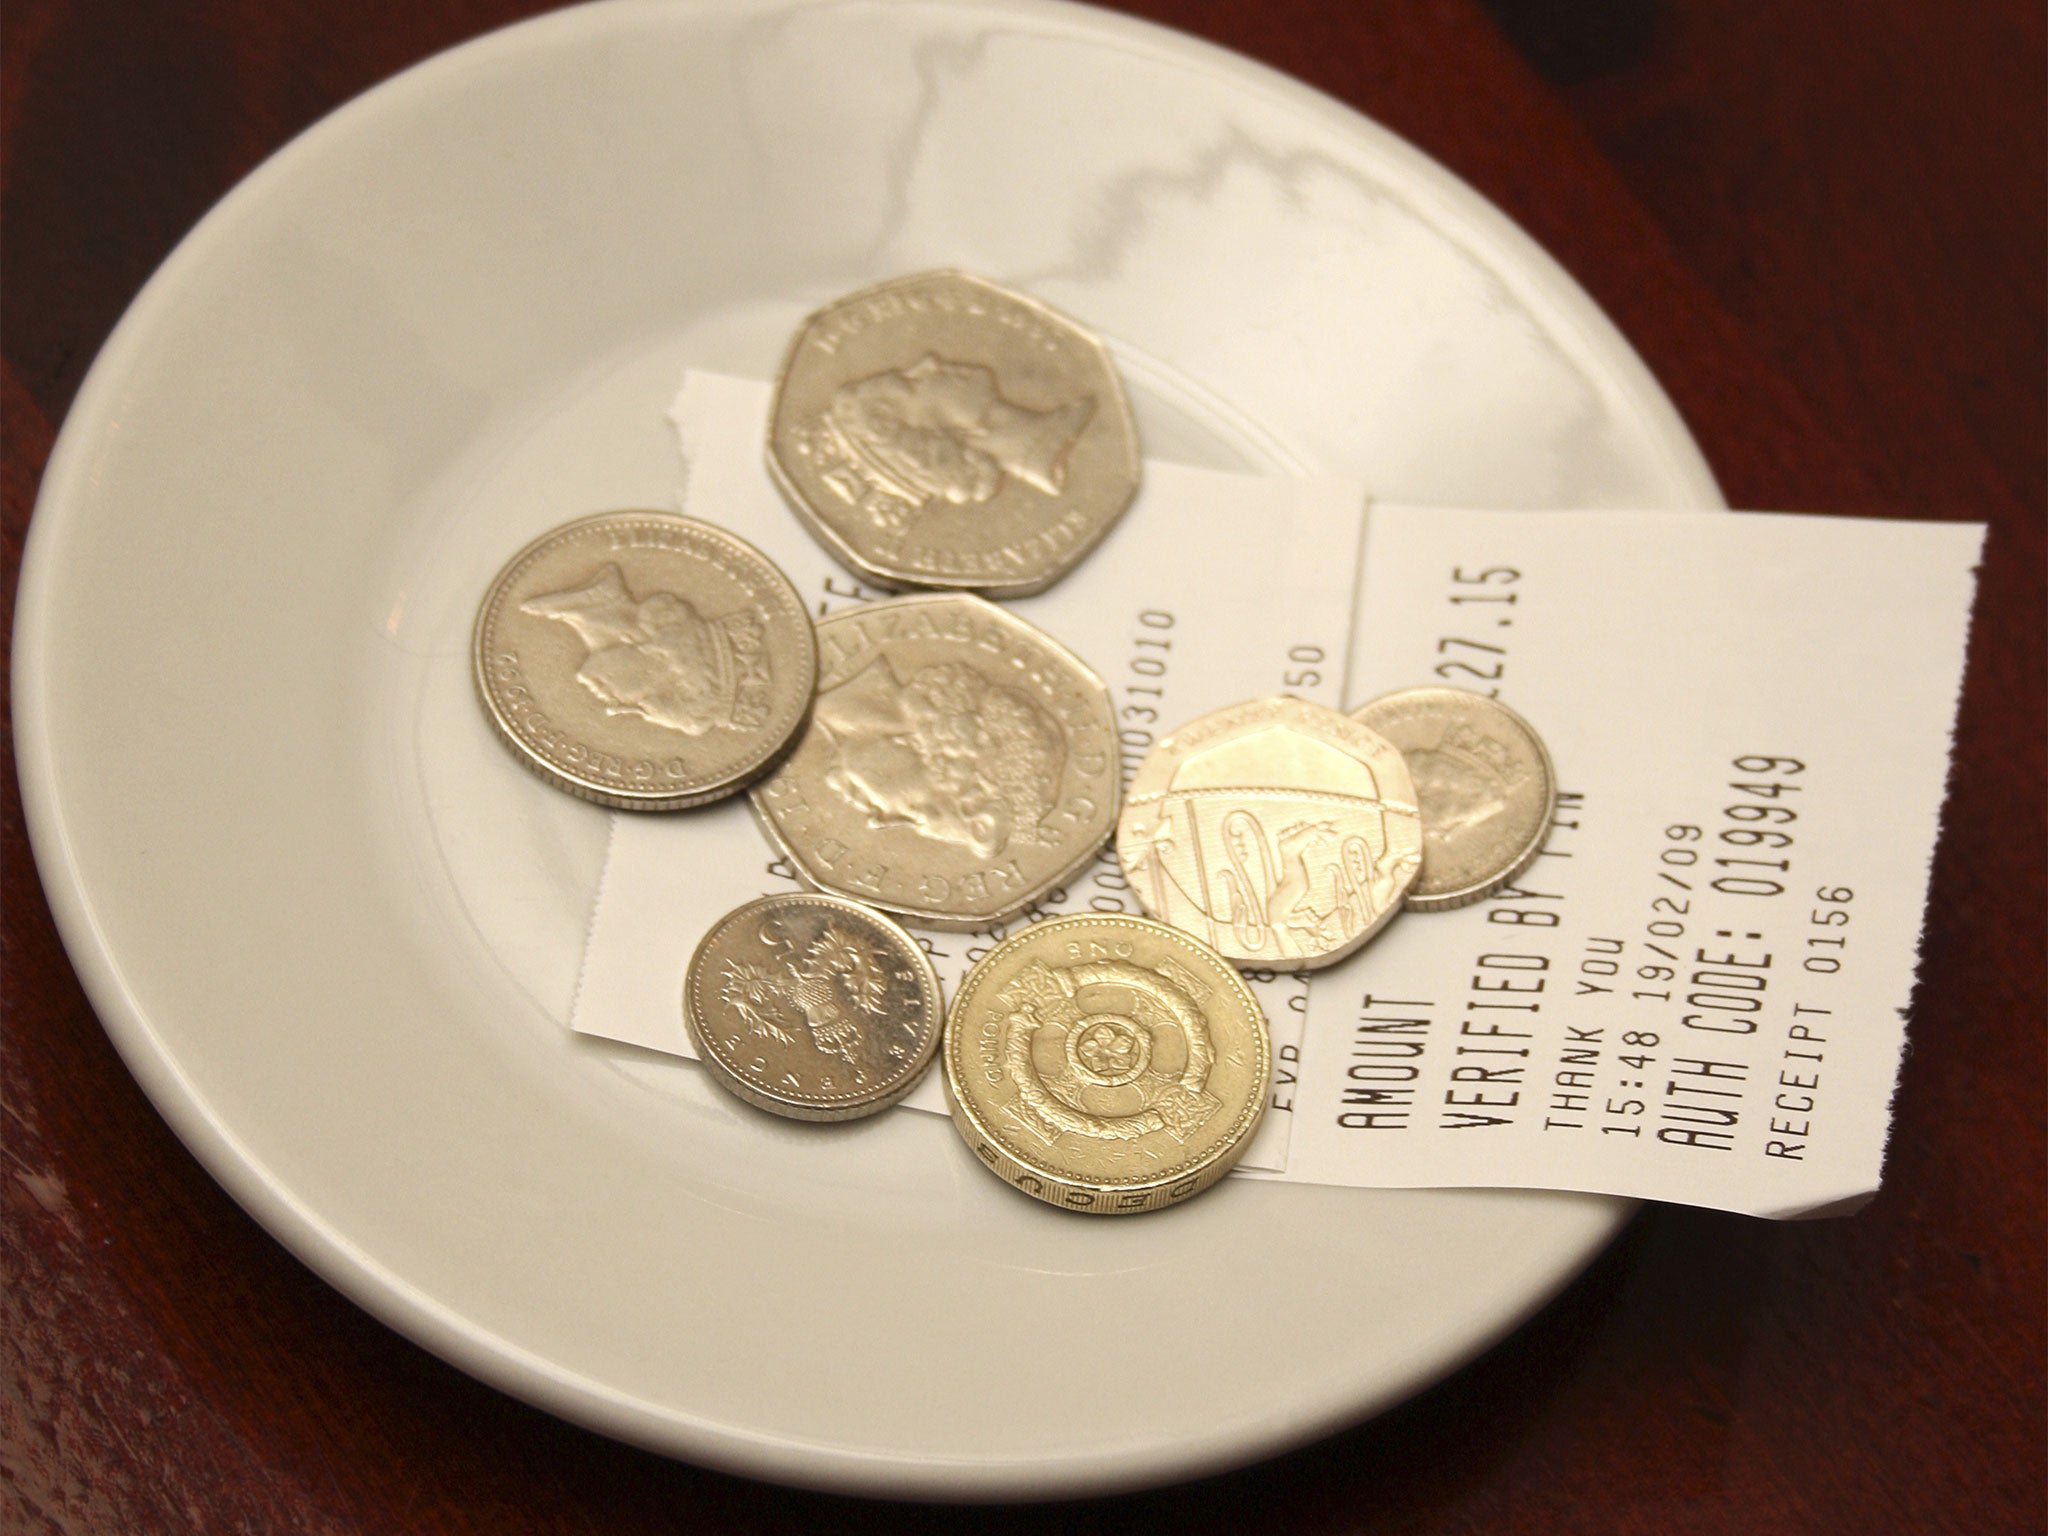 The average Briton leaves a tip of £4.18, according to the research